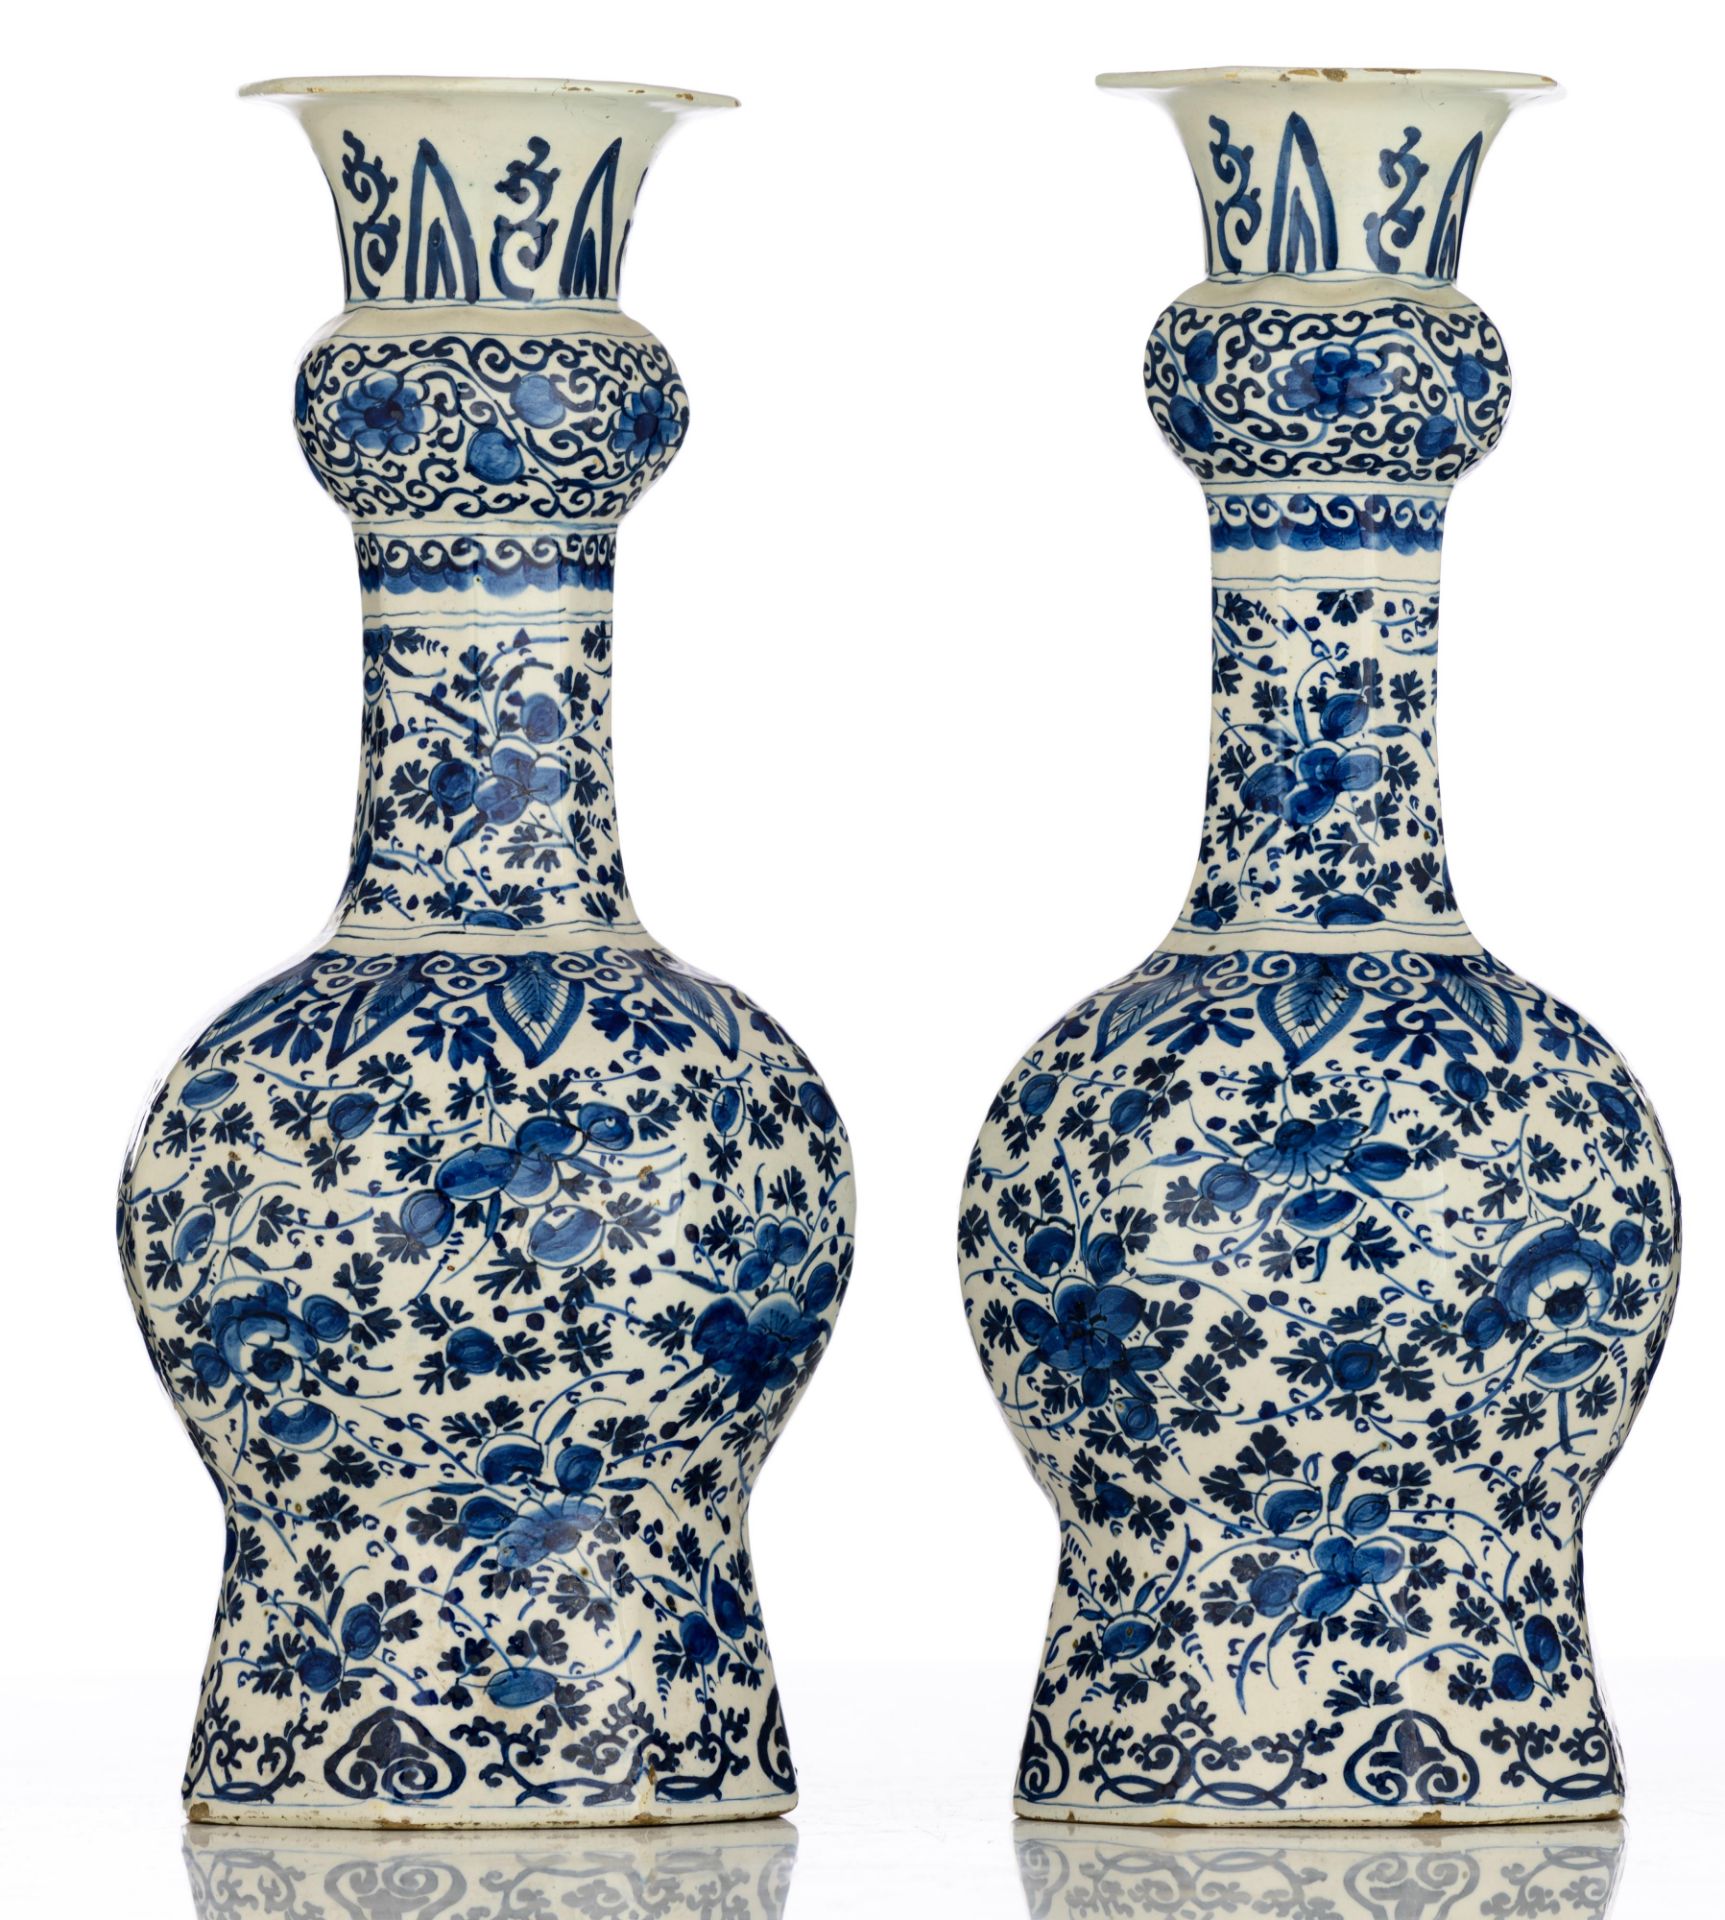 A pair of blue and white floral decorated Dutch Delftware garlic bottle vases, 18thC, H 37 cm. Added - Bild 3 aus 17